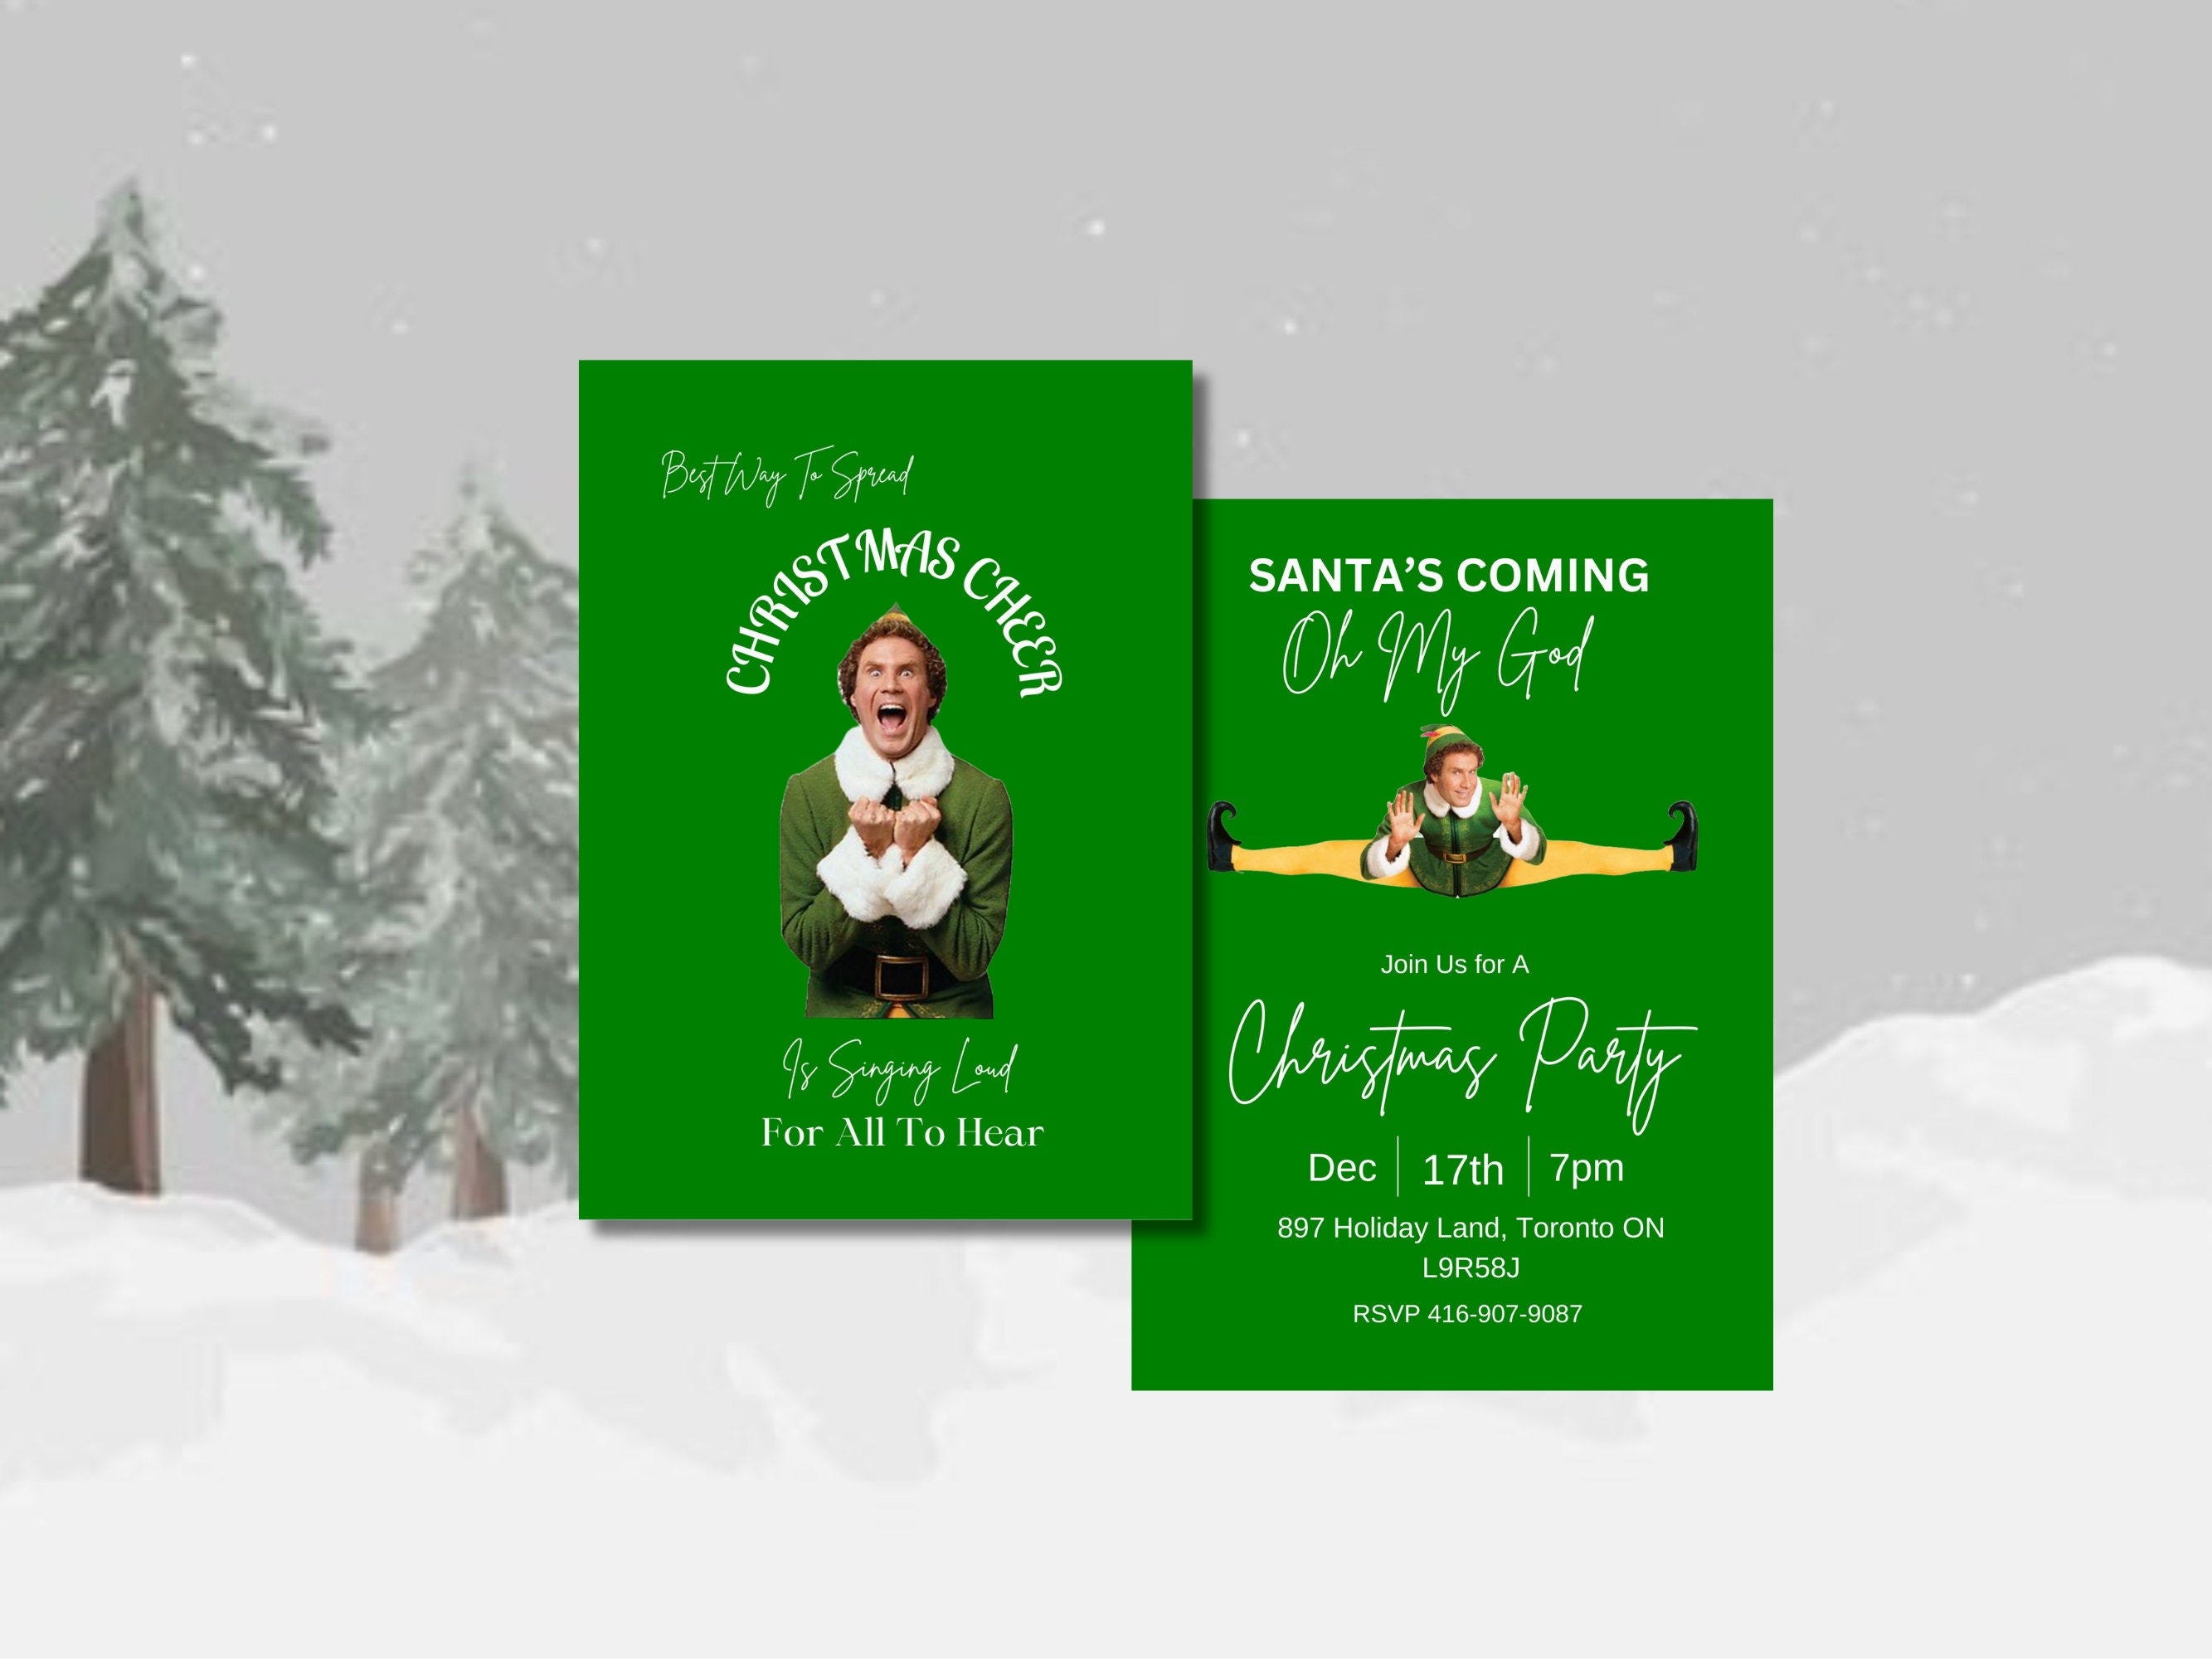 DIY Holiday Party Invitation, DIY Christmas Party Invitation, Buddy The Elf Inspired, Digital Download, Instant Download, Friendmas invite